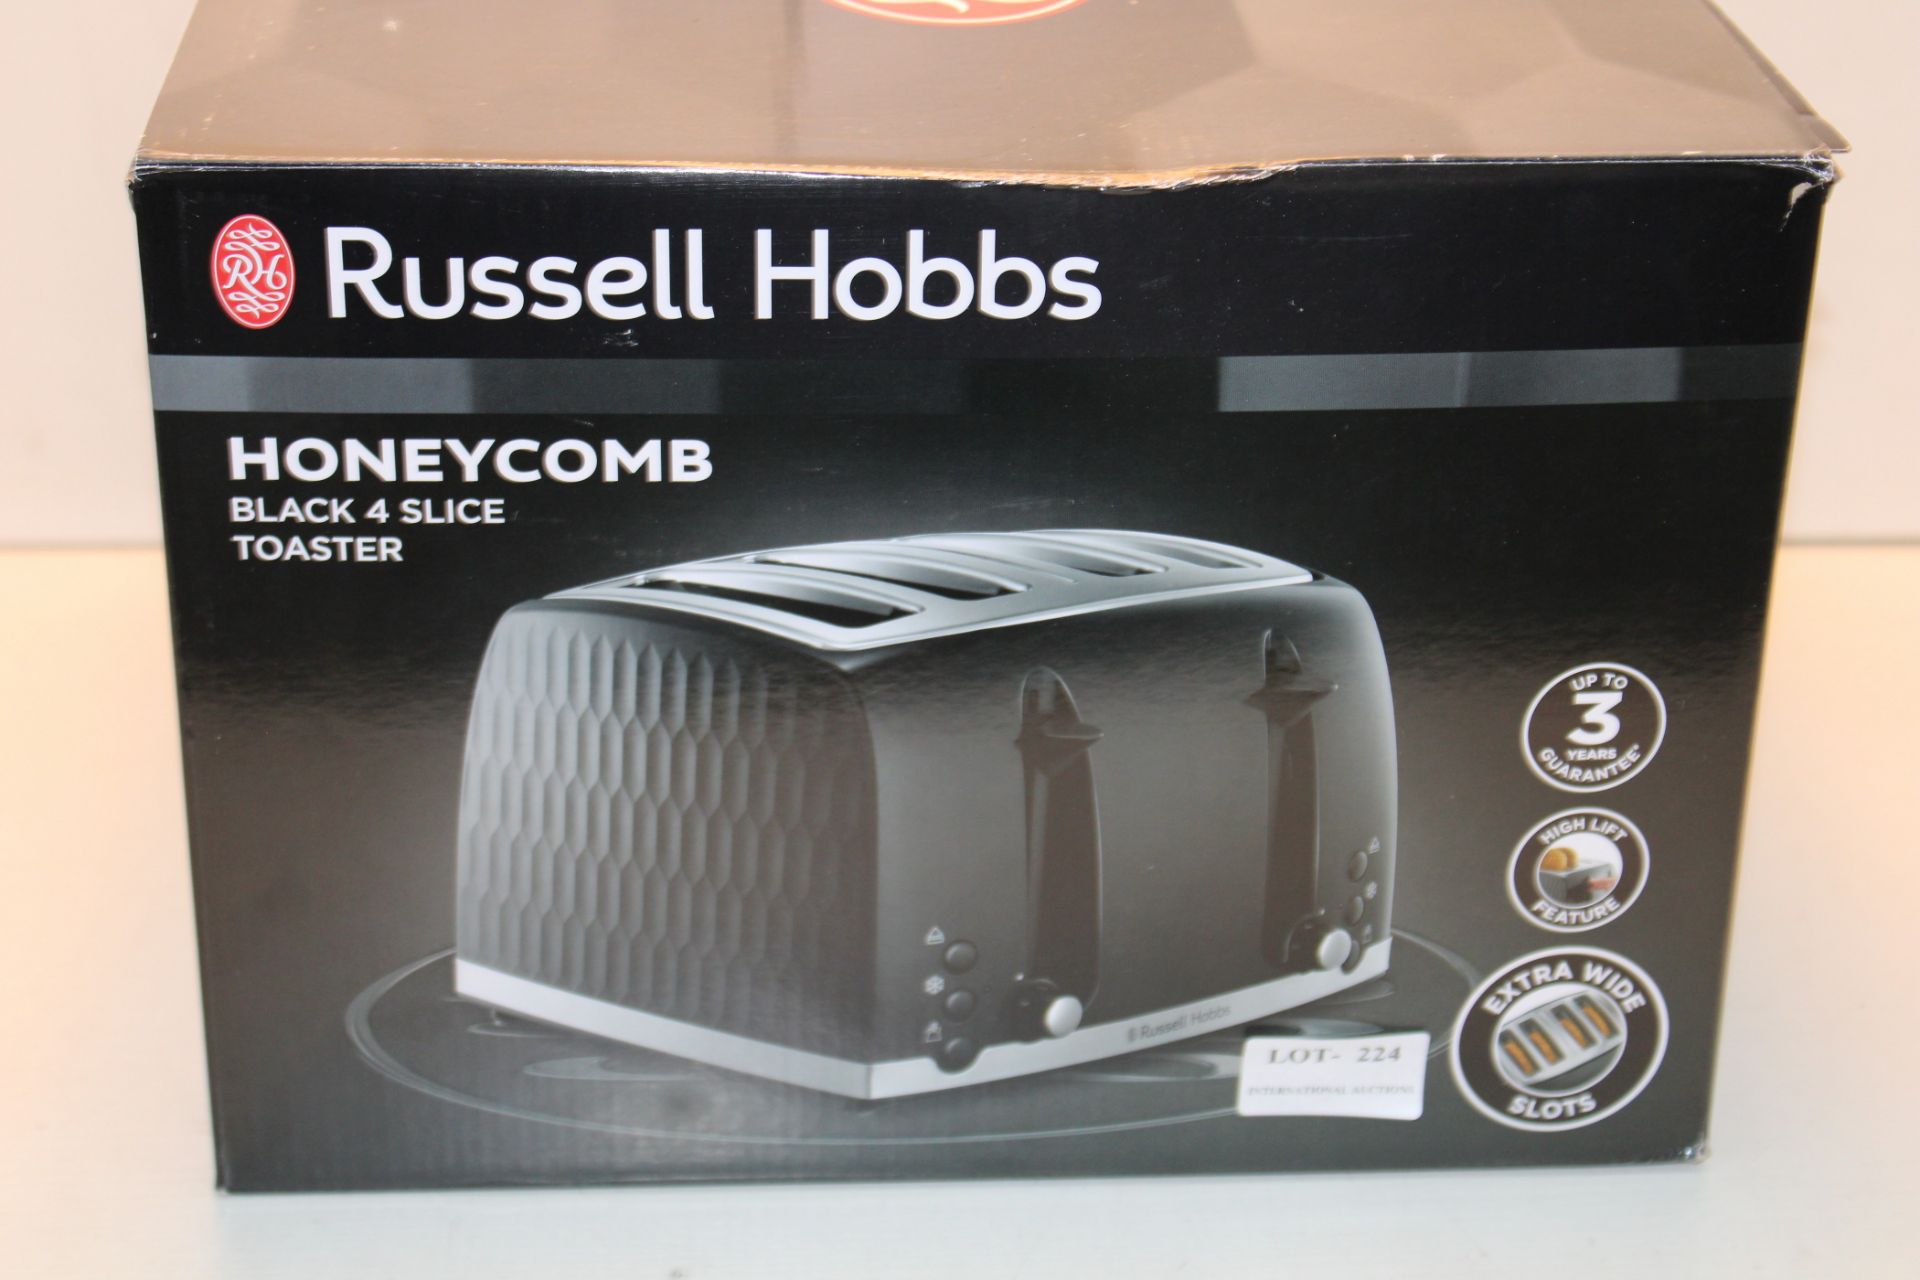 BOXED RUSSELL HOBBS HONECOMB BLACK4 SLICE TOASTER RRP £35.99Condition ReportAppraisal Available on